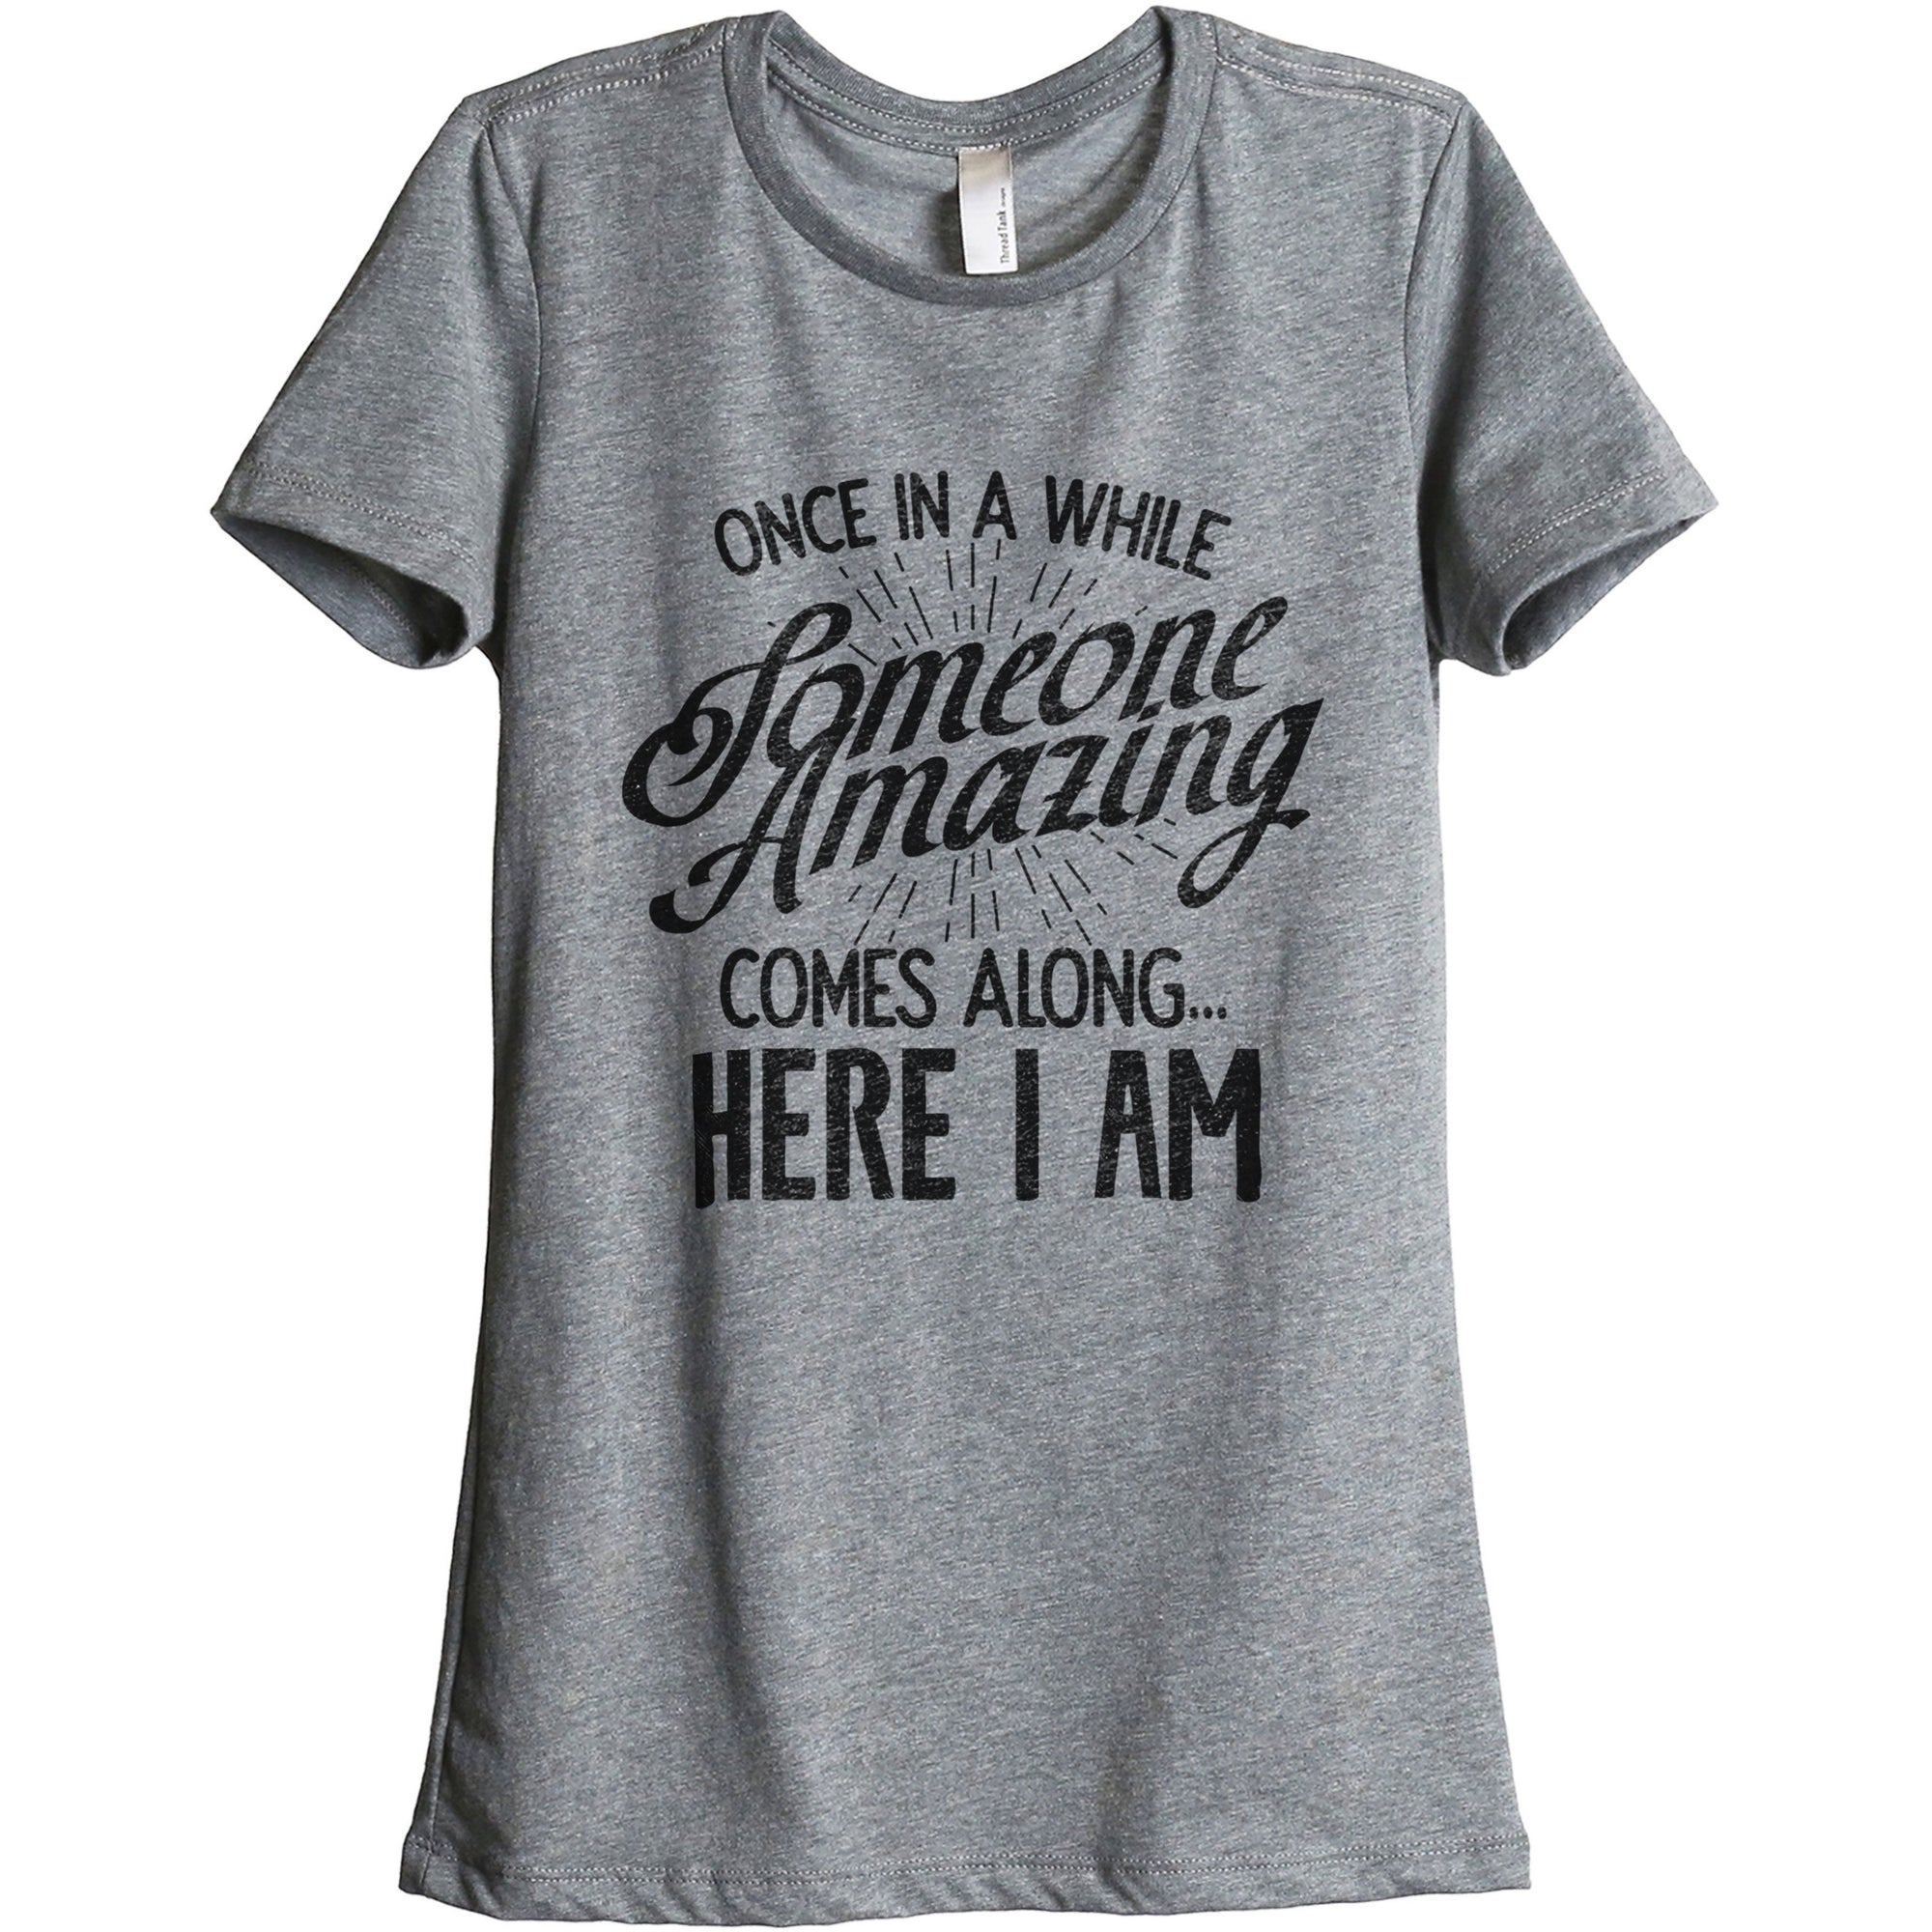 Once In A While Someone Amazing Comes Along and Here I Am - threadtank | stories you can wear